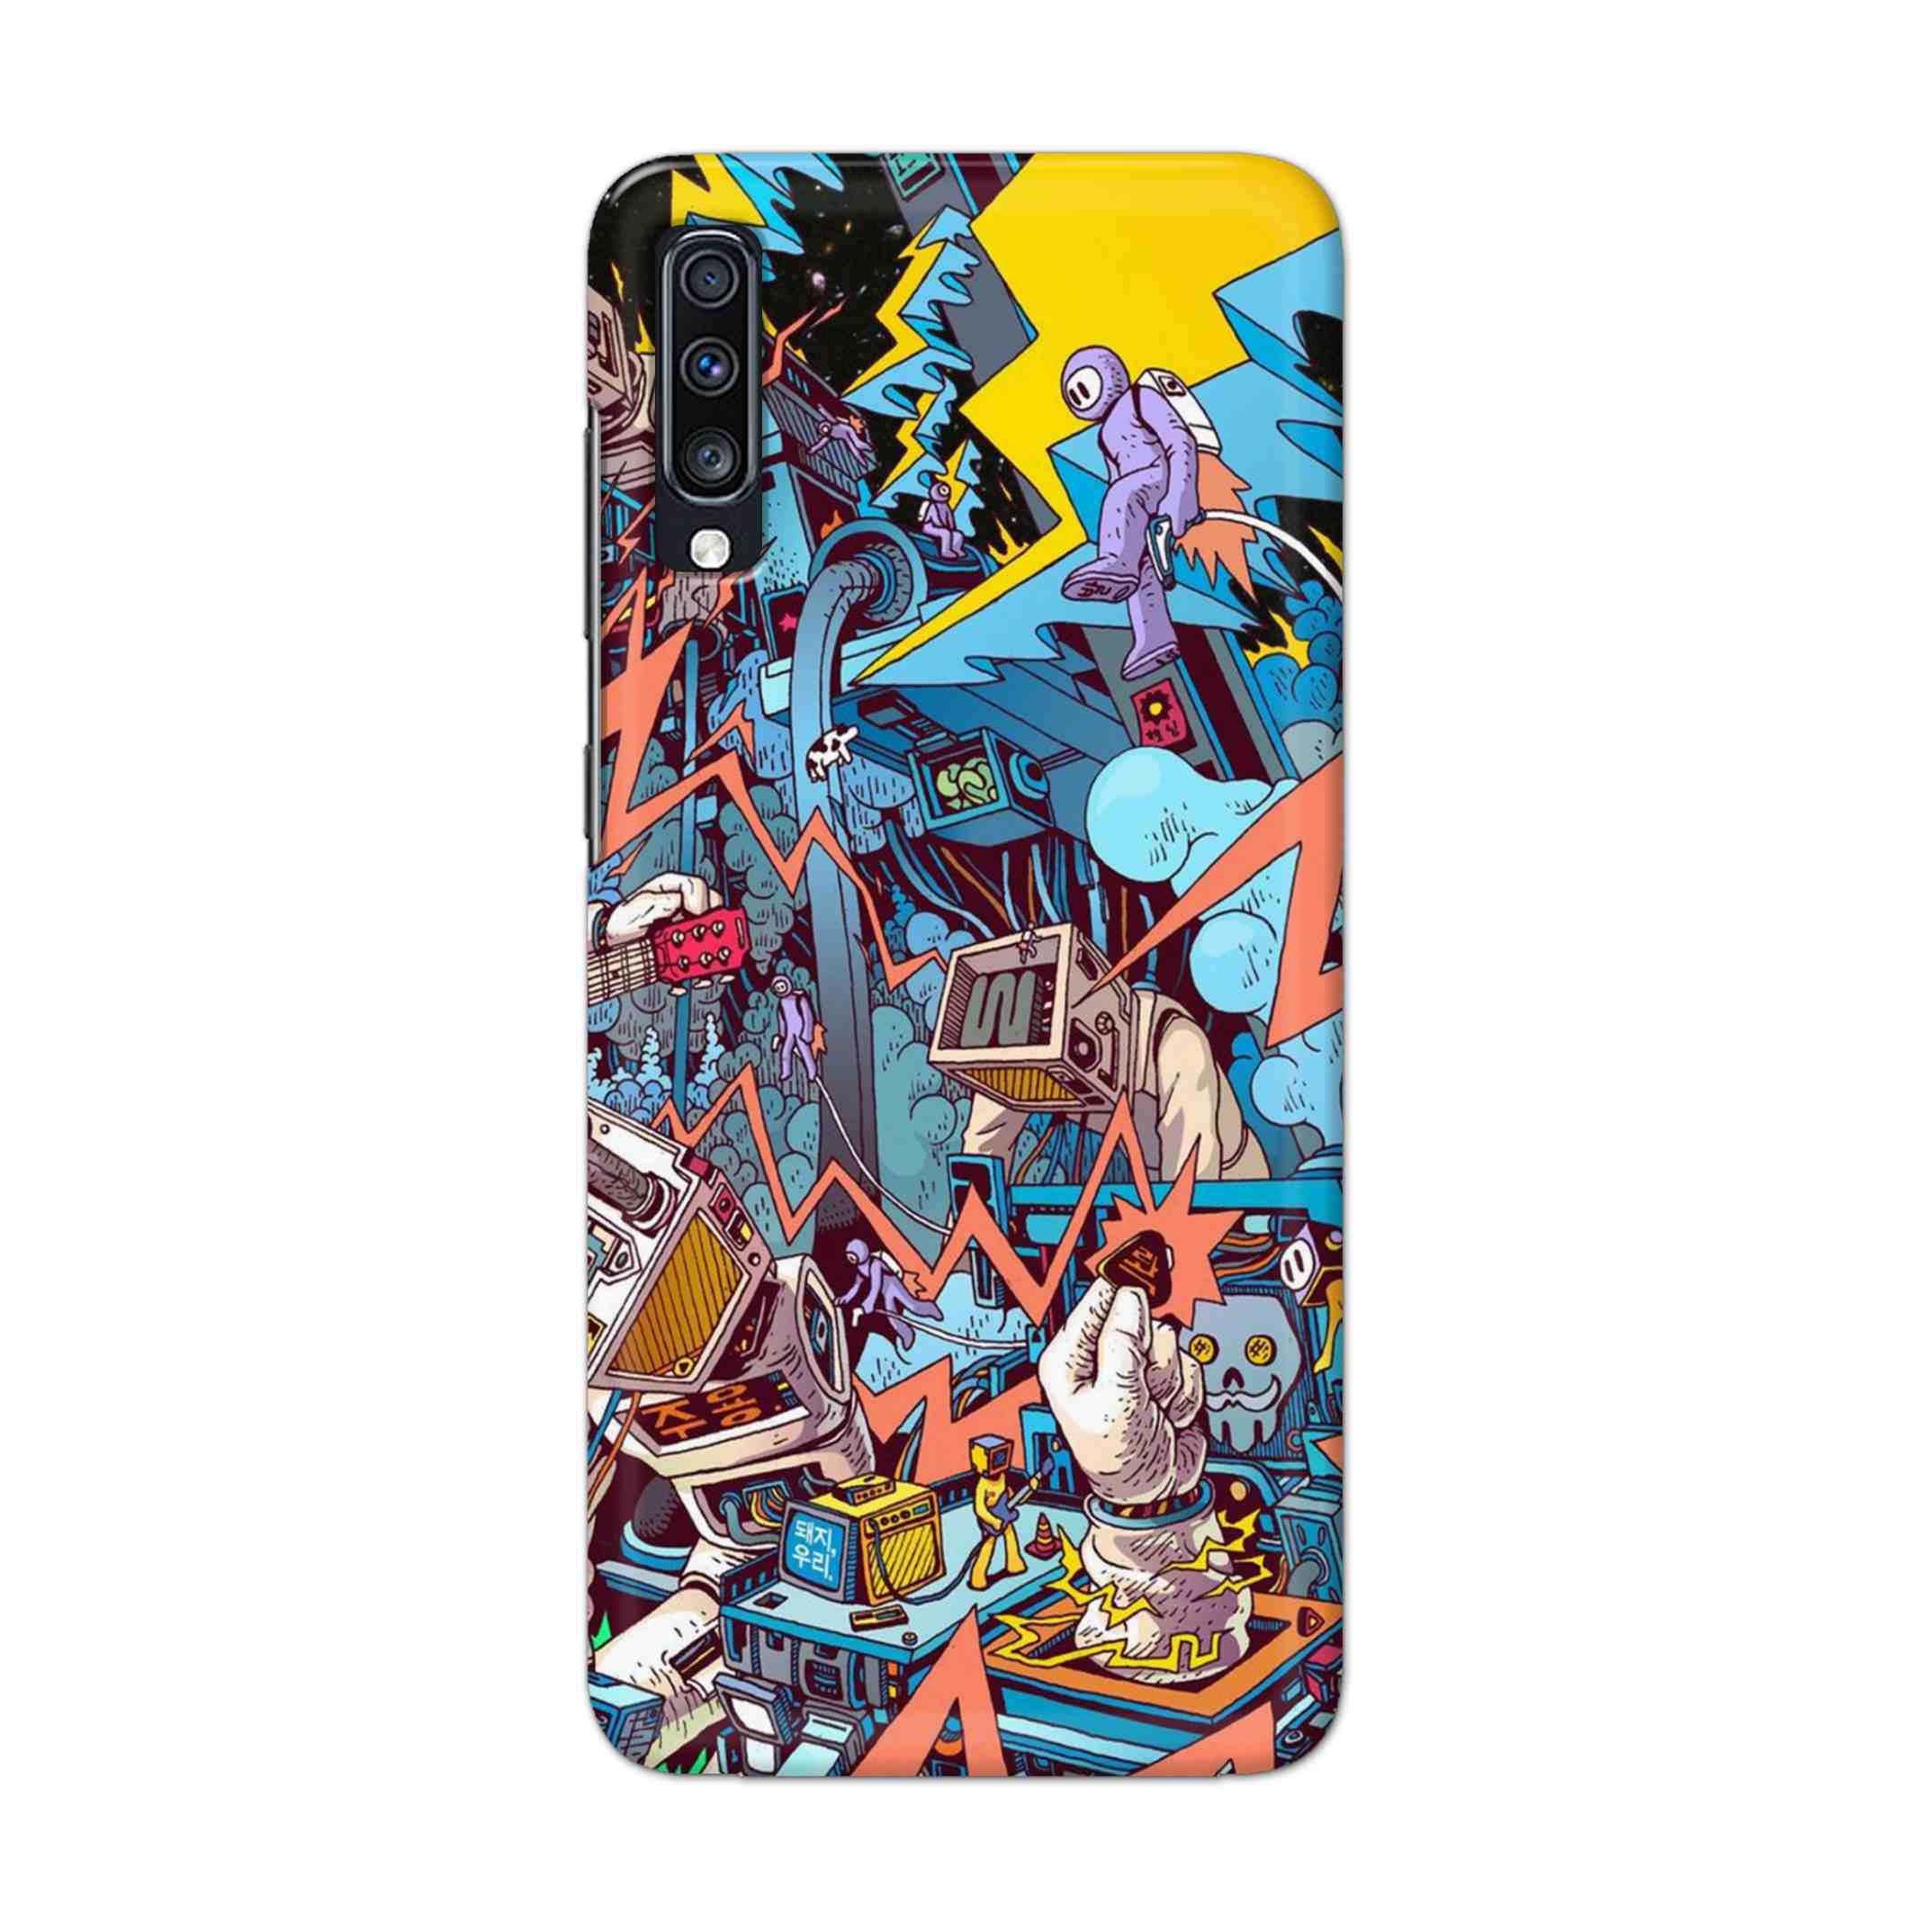 Buy Ofo Panic Hard Back Mobile Phone Case Cover For Samsung Galaxy A70 Online